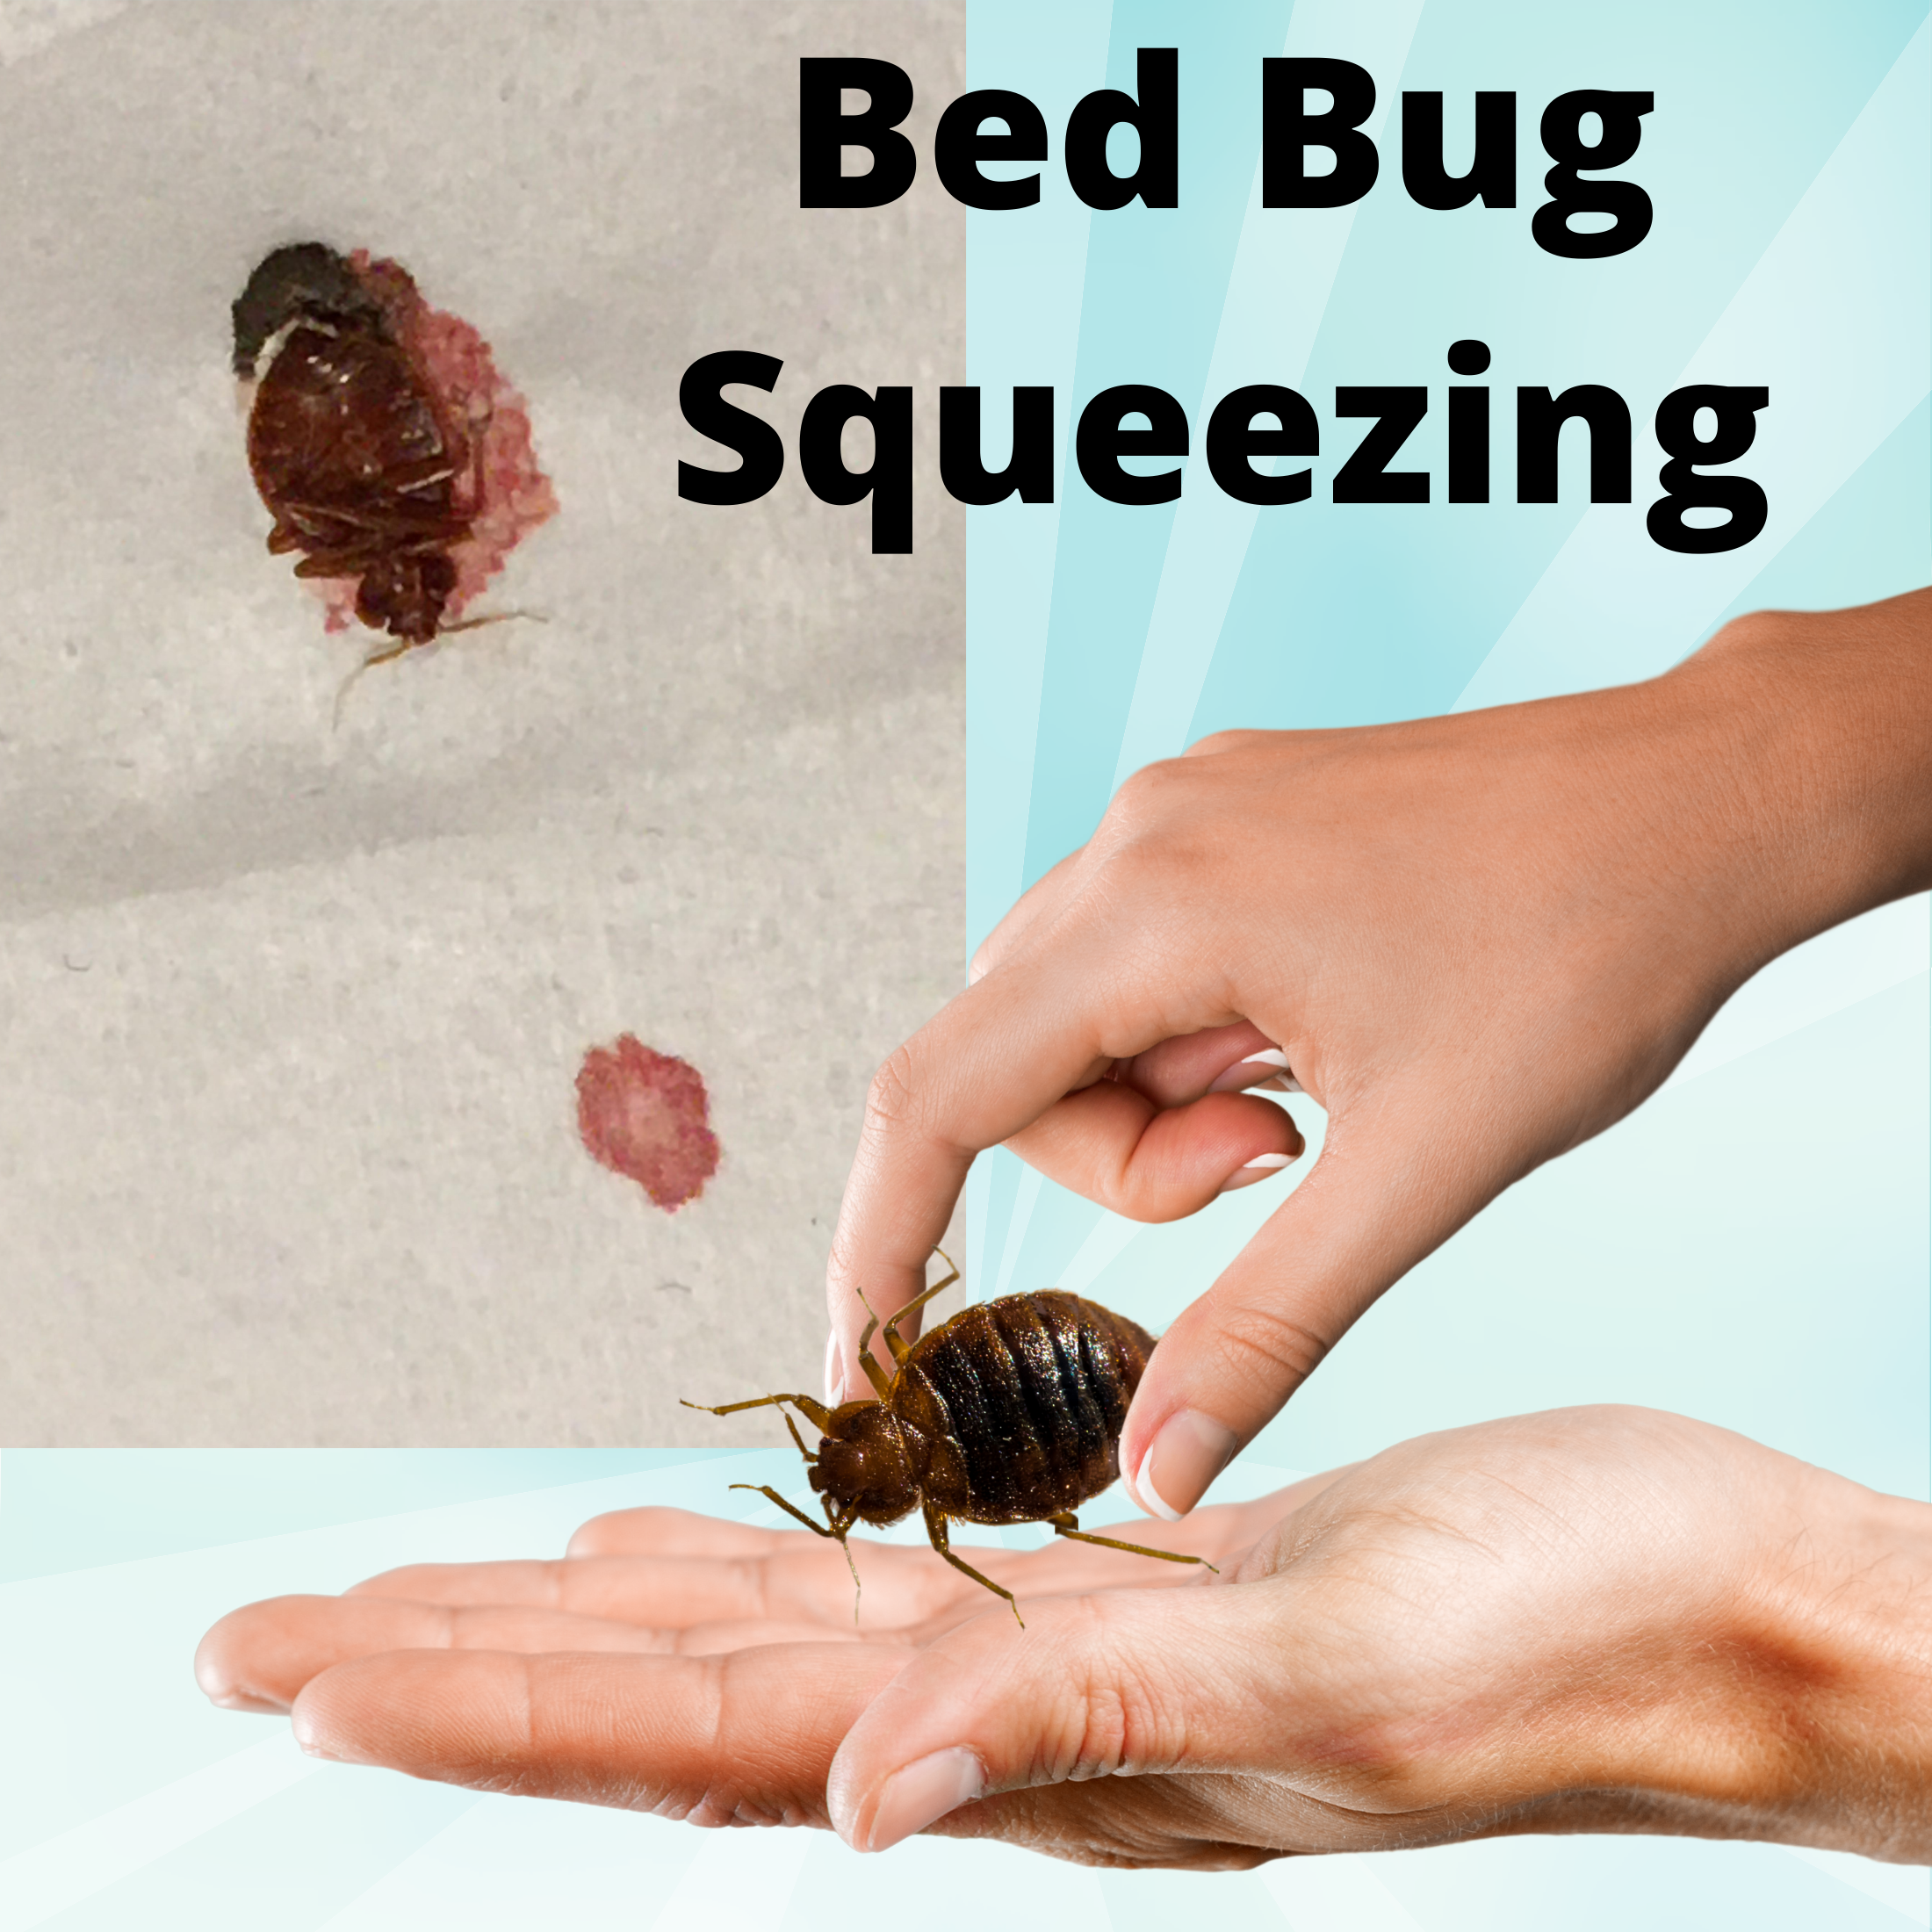 Can squeezing bed bug multiply them?